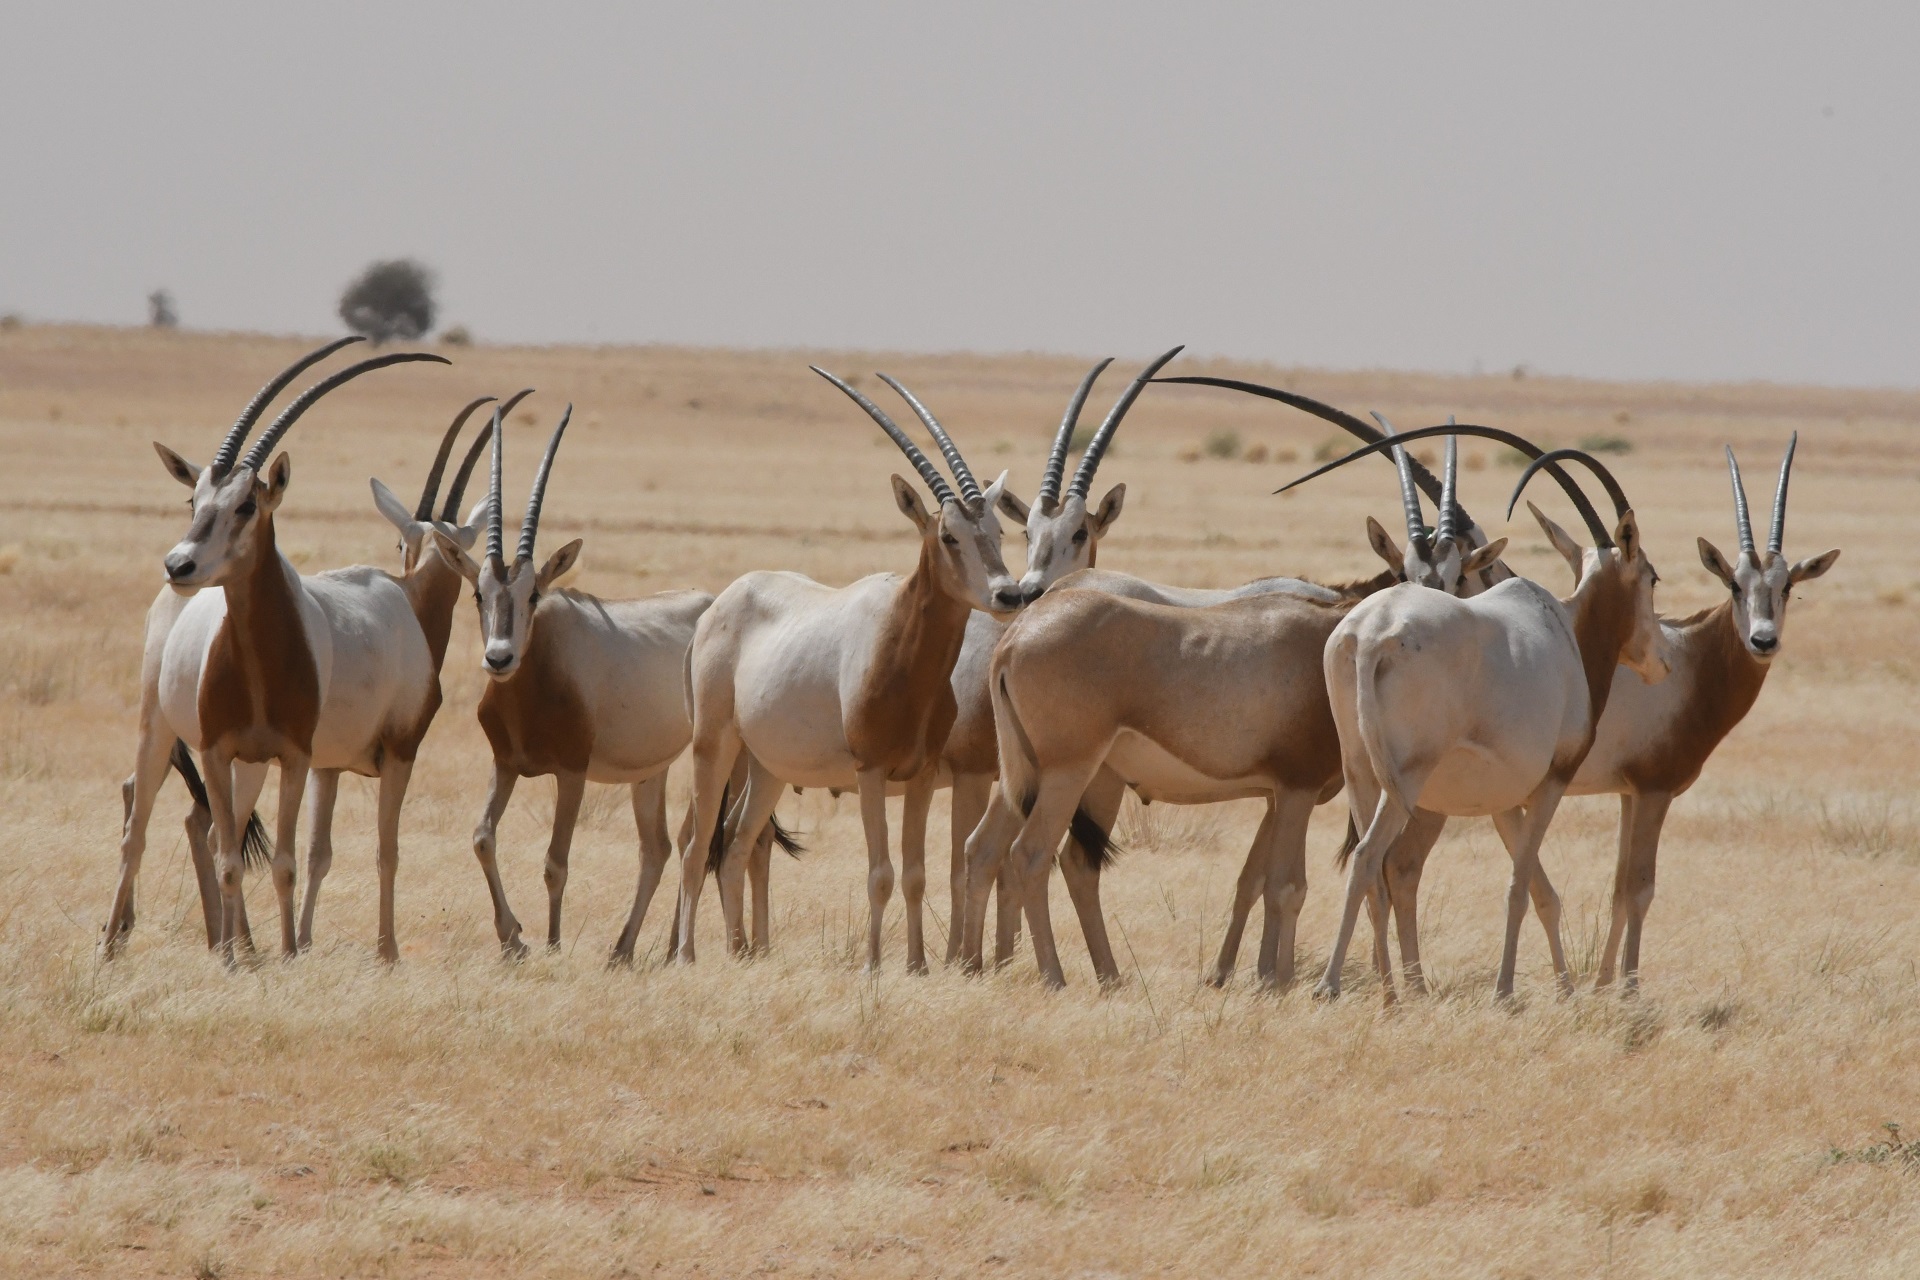 Scimitar-horned oryx in the wild 

IMAGE: John Newby Sahara Conservation